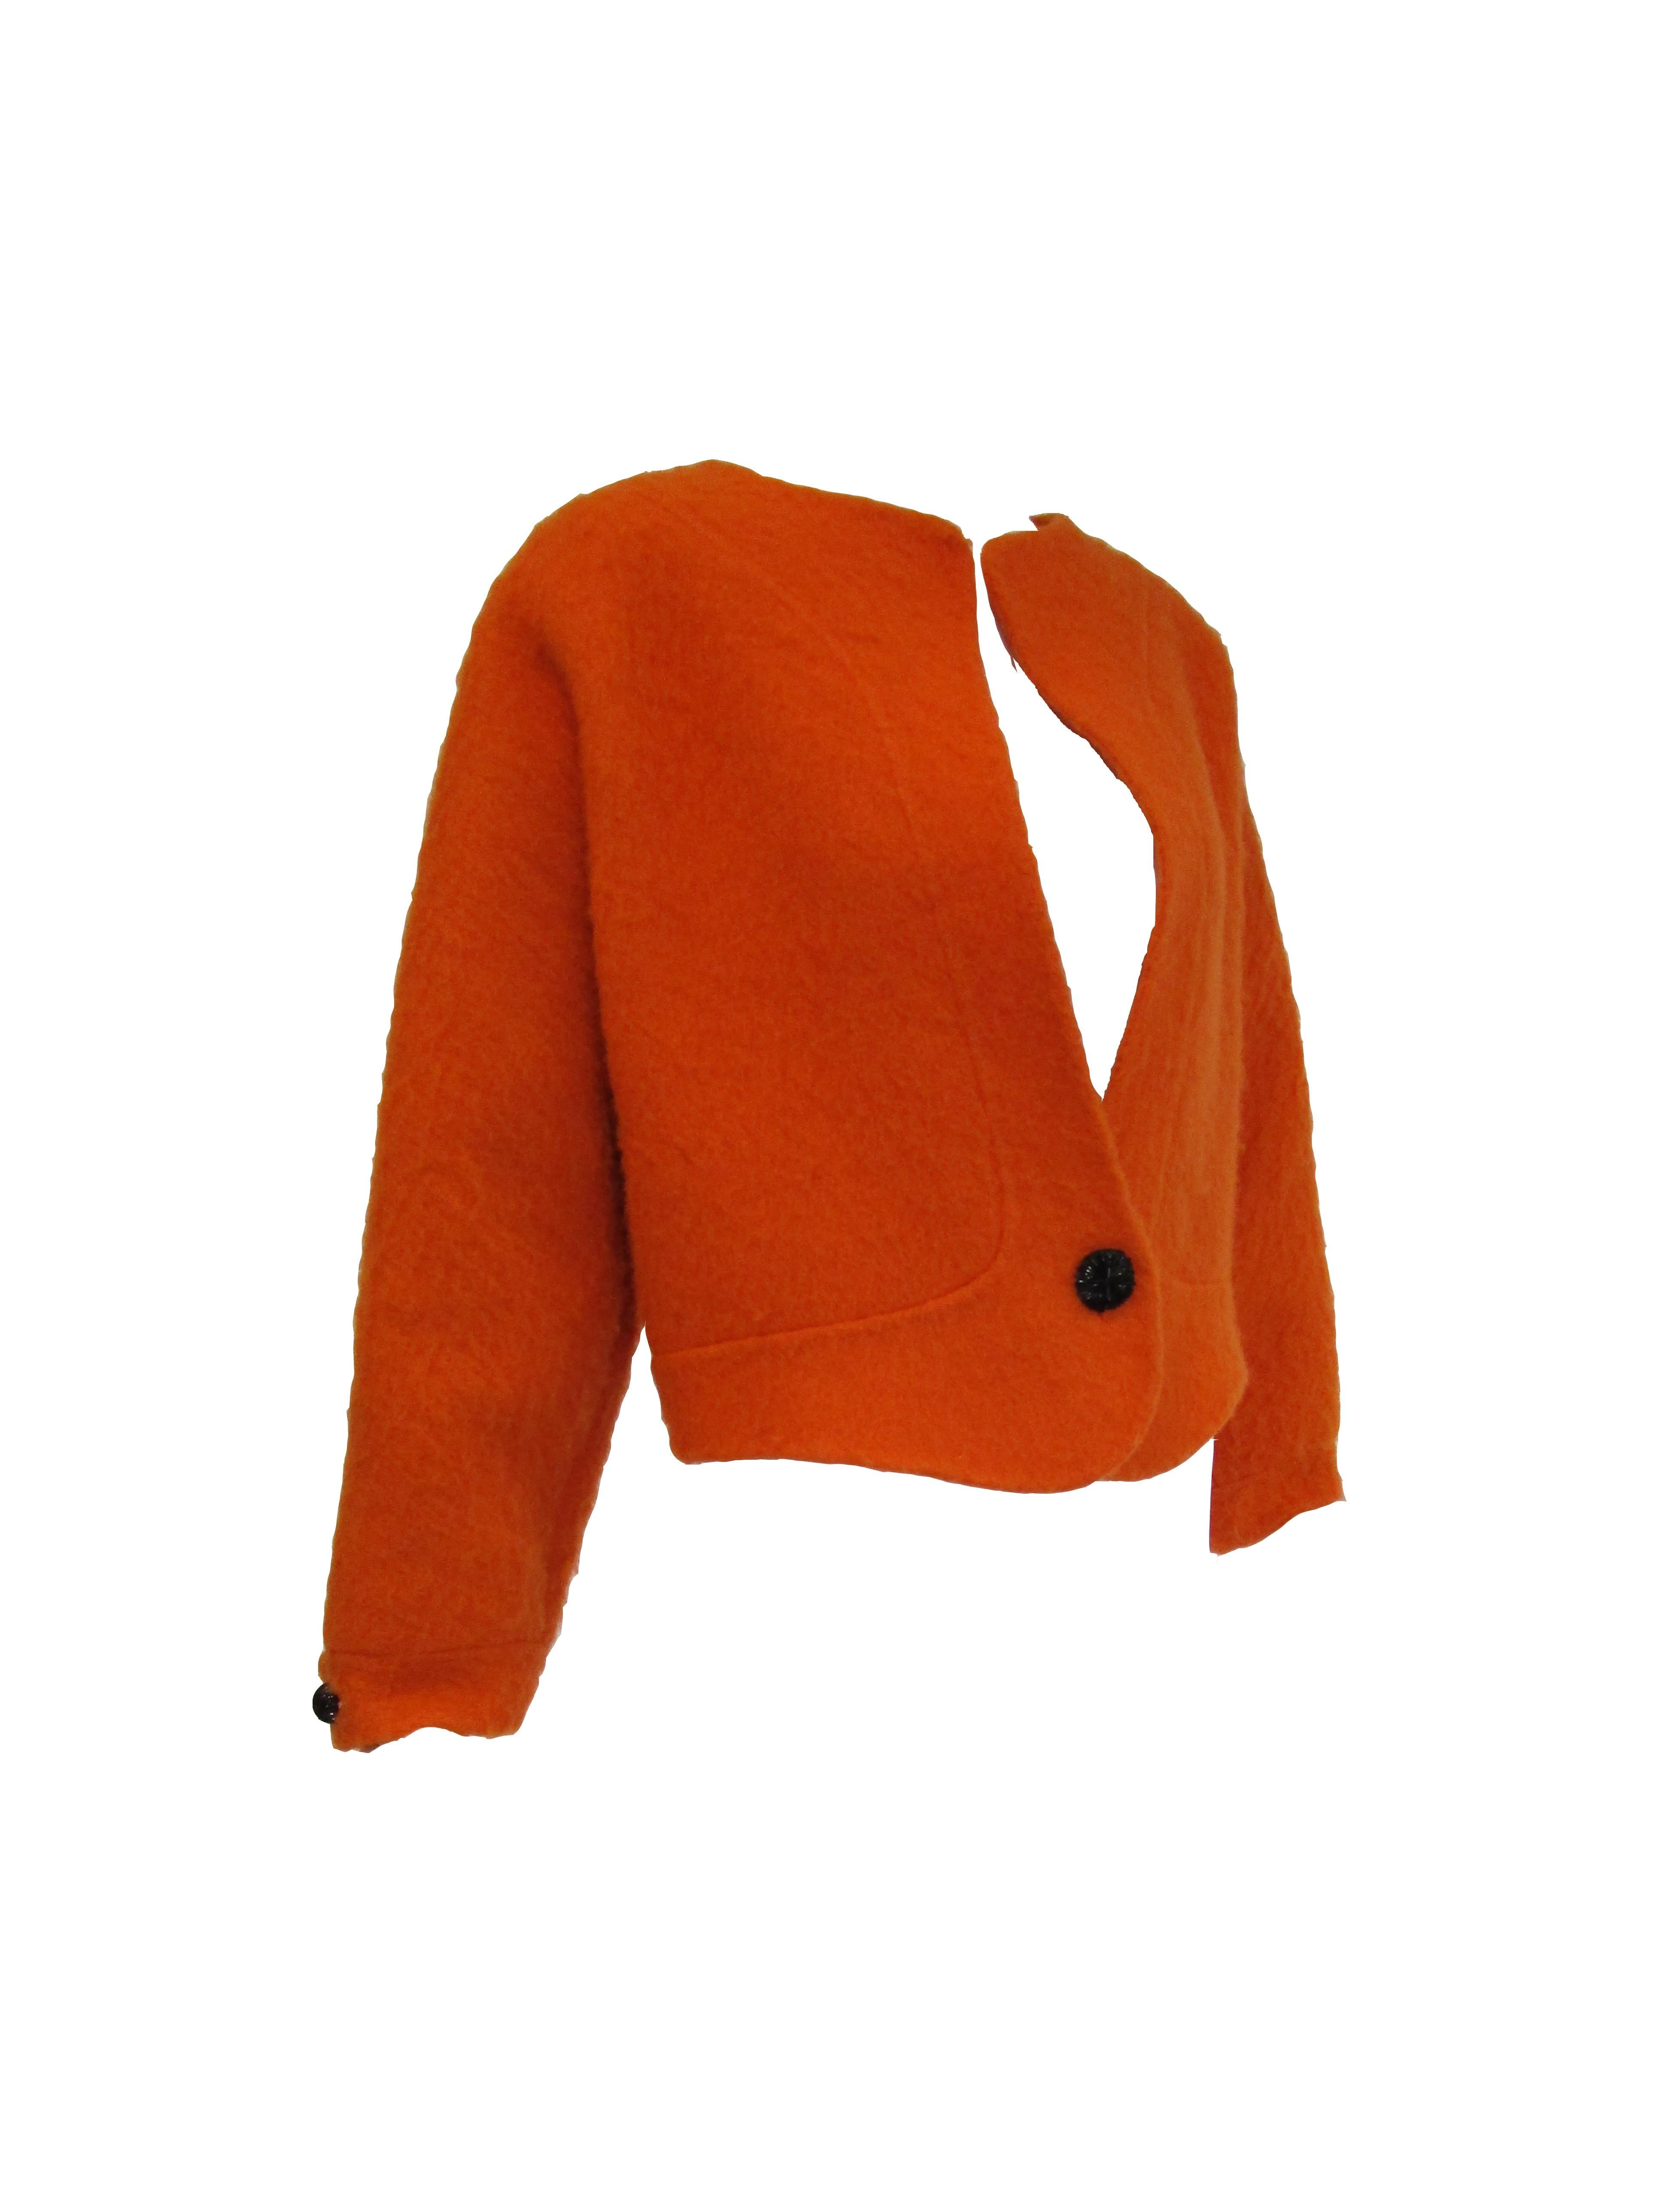 Fun and playful orange mohair jacket by Geoffrey Beene! 
This  intriguingly paneled jacket features a slightly cropped, boxy silhouette and wide sleeves.
Mohair is warm, proving to be a great option for the winter! 
You can be cozy, warm and